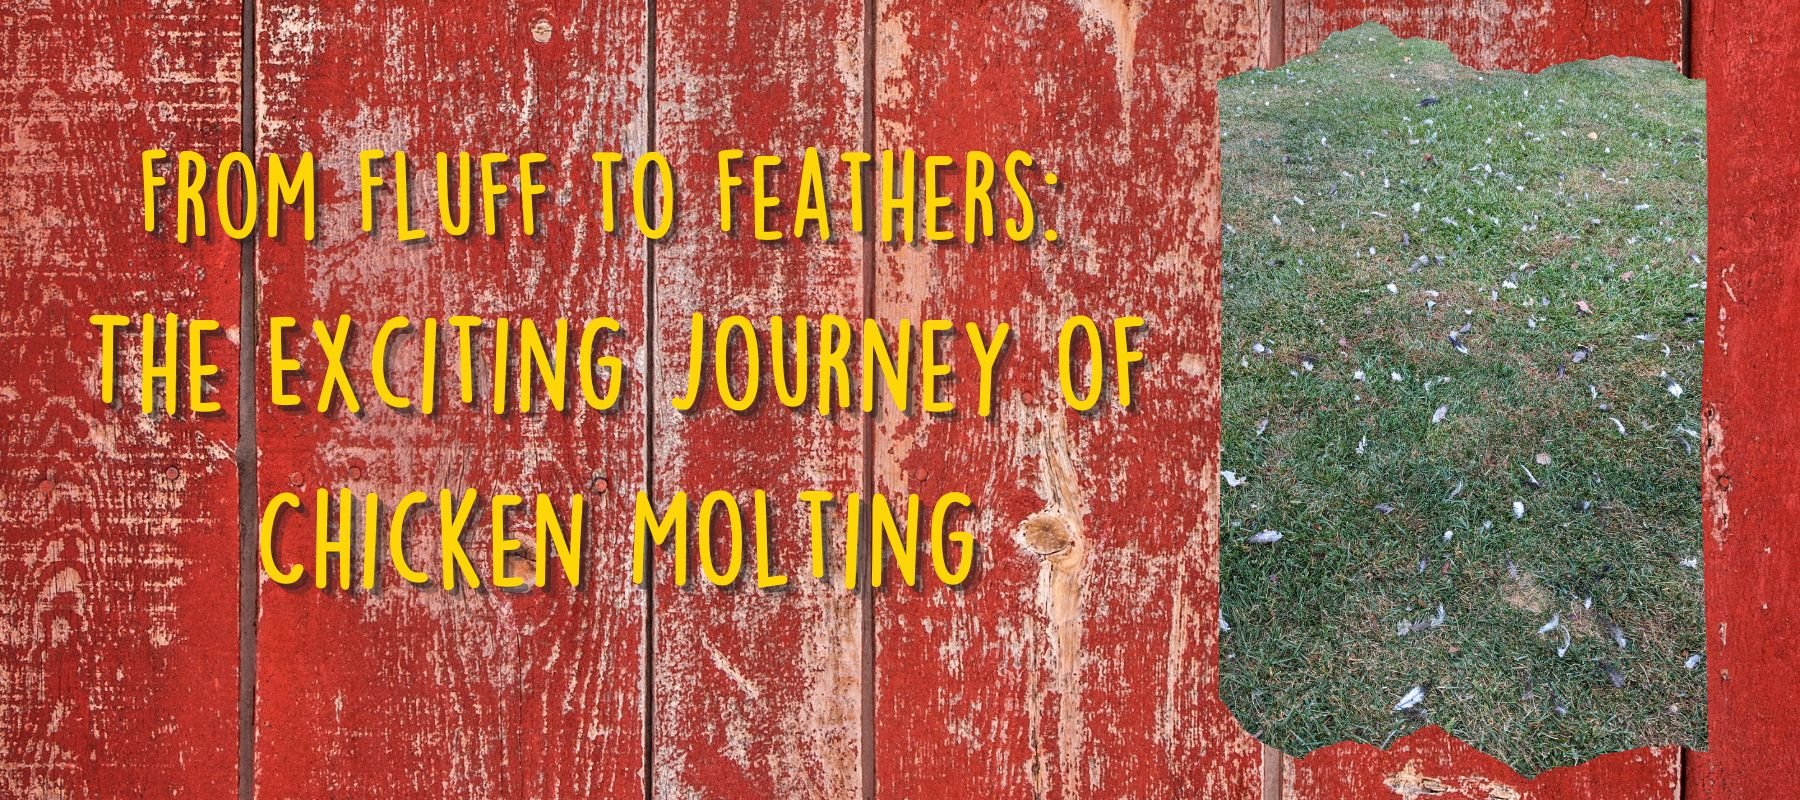 From Fluff to Feathers: The Exciting Journey of Chicken Molting - Cluck It All Farms